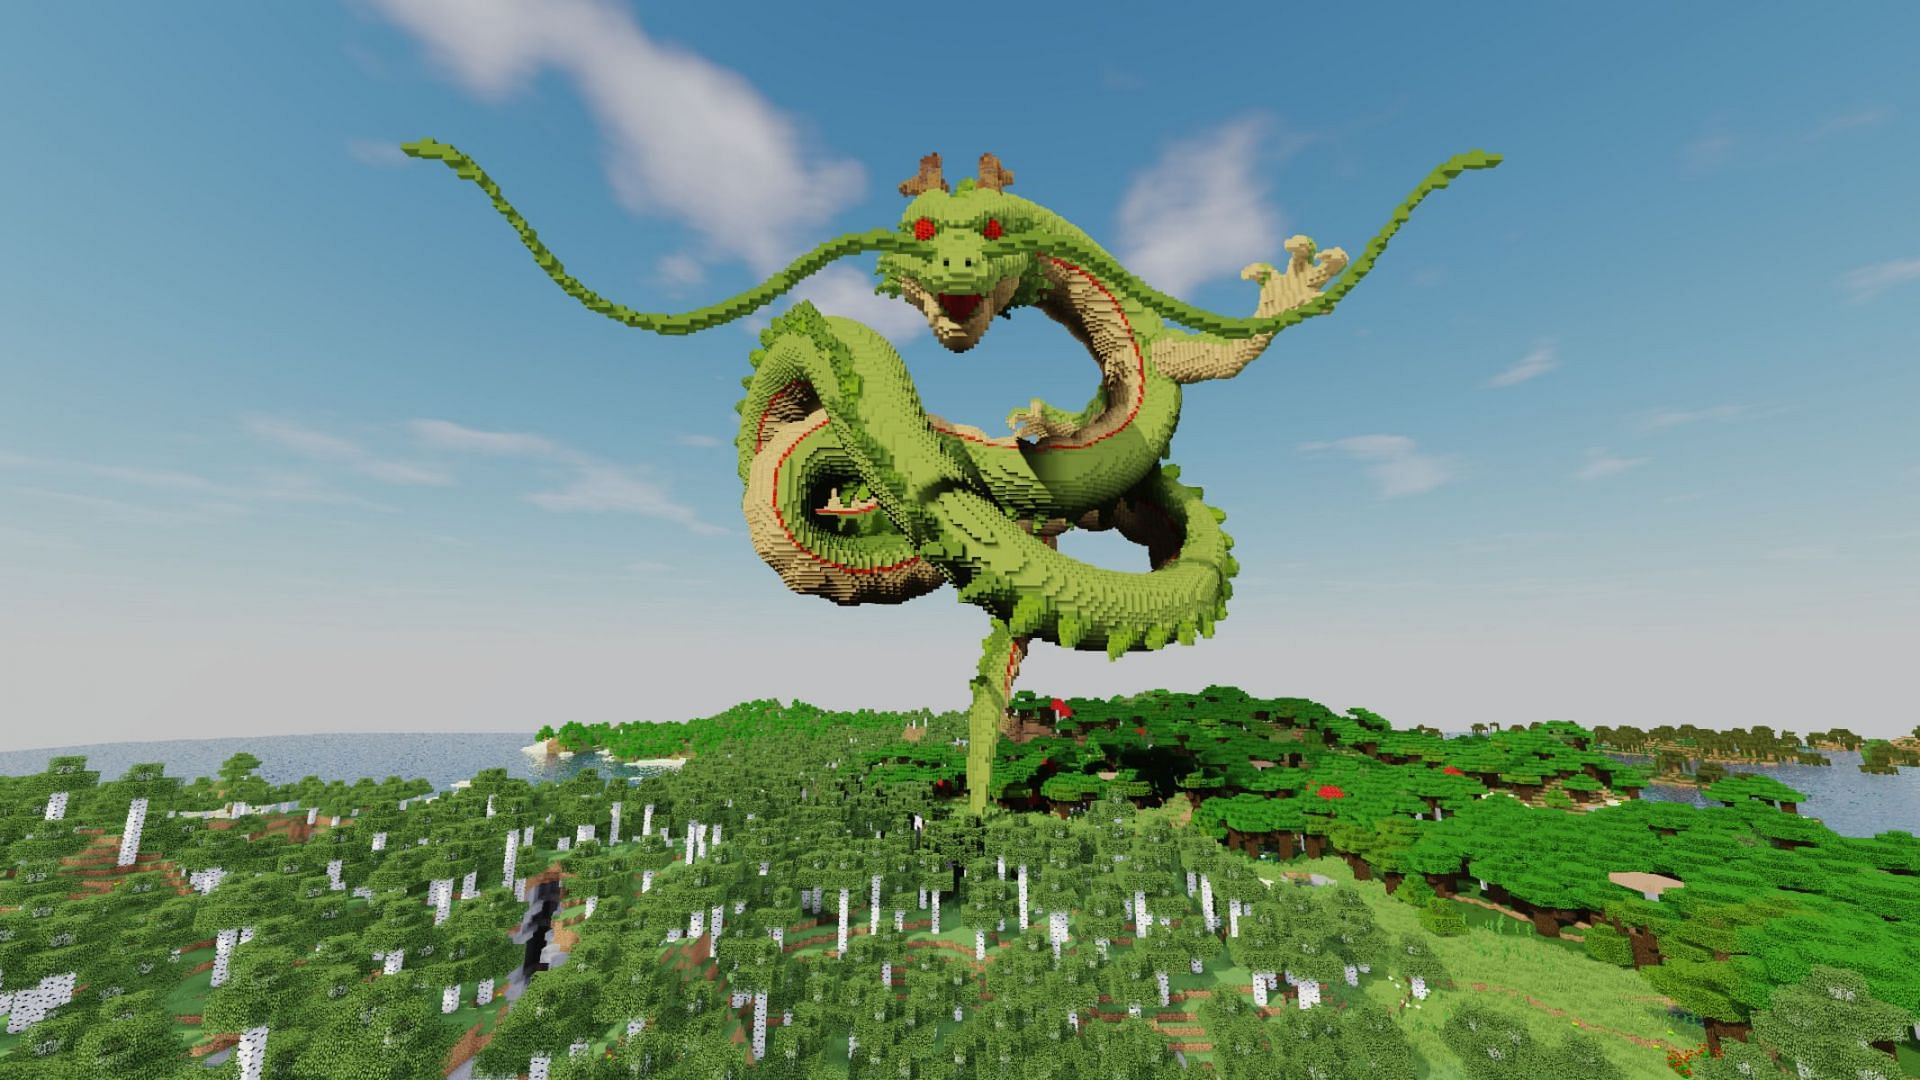 A schematic build featuring Shenron of the Dragon Ball franchise (Image via Sketchfab user inostupid)